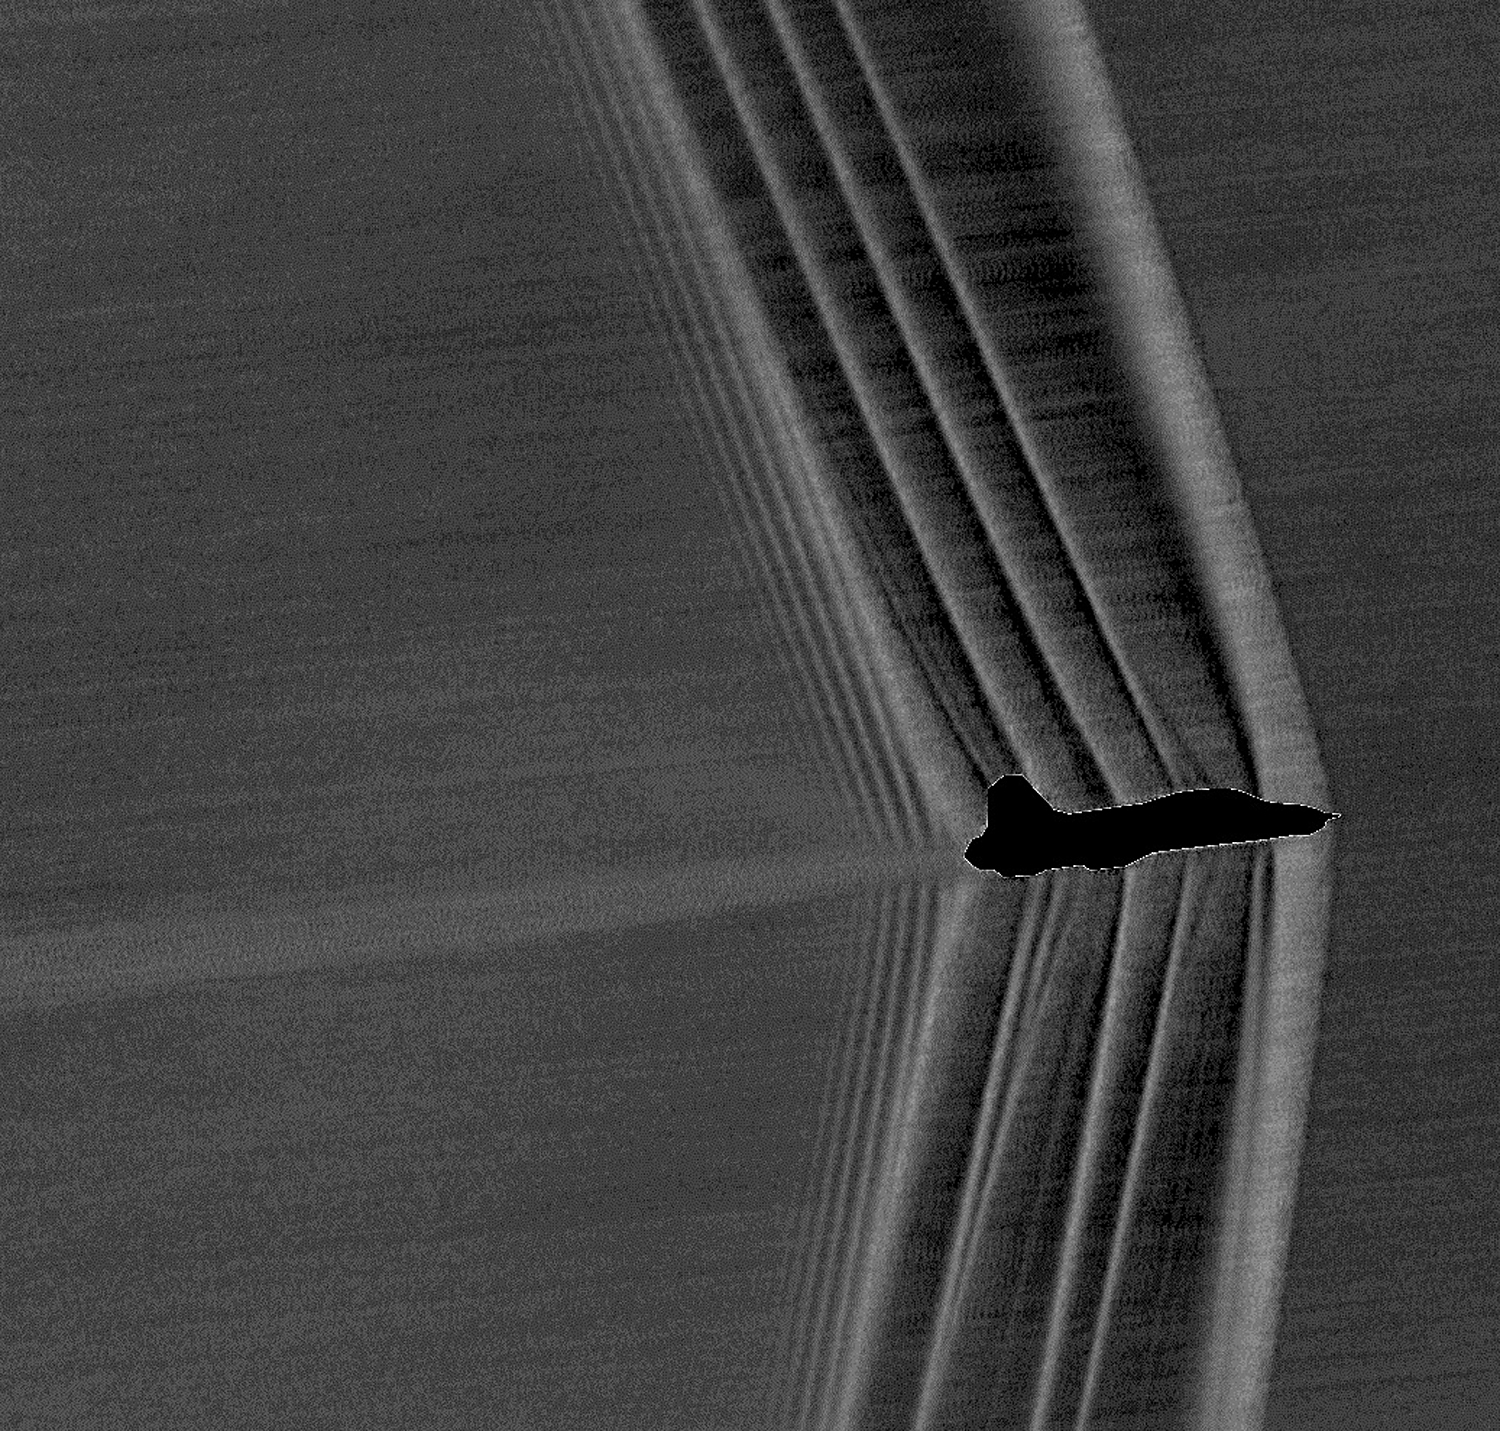 Shockwaves produced by a U.S. Air Force Test Pilot School T-38 banking at Mach 1.05. (NASA)